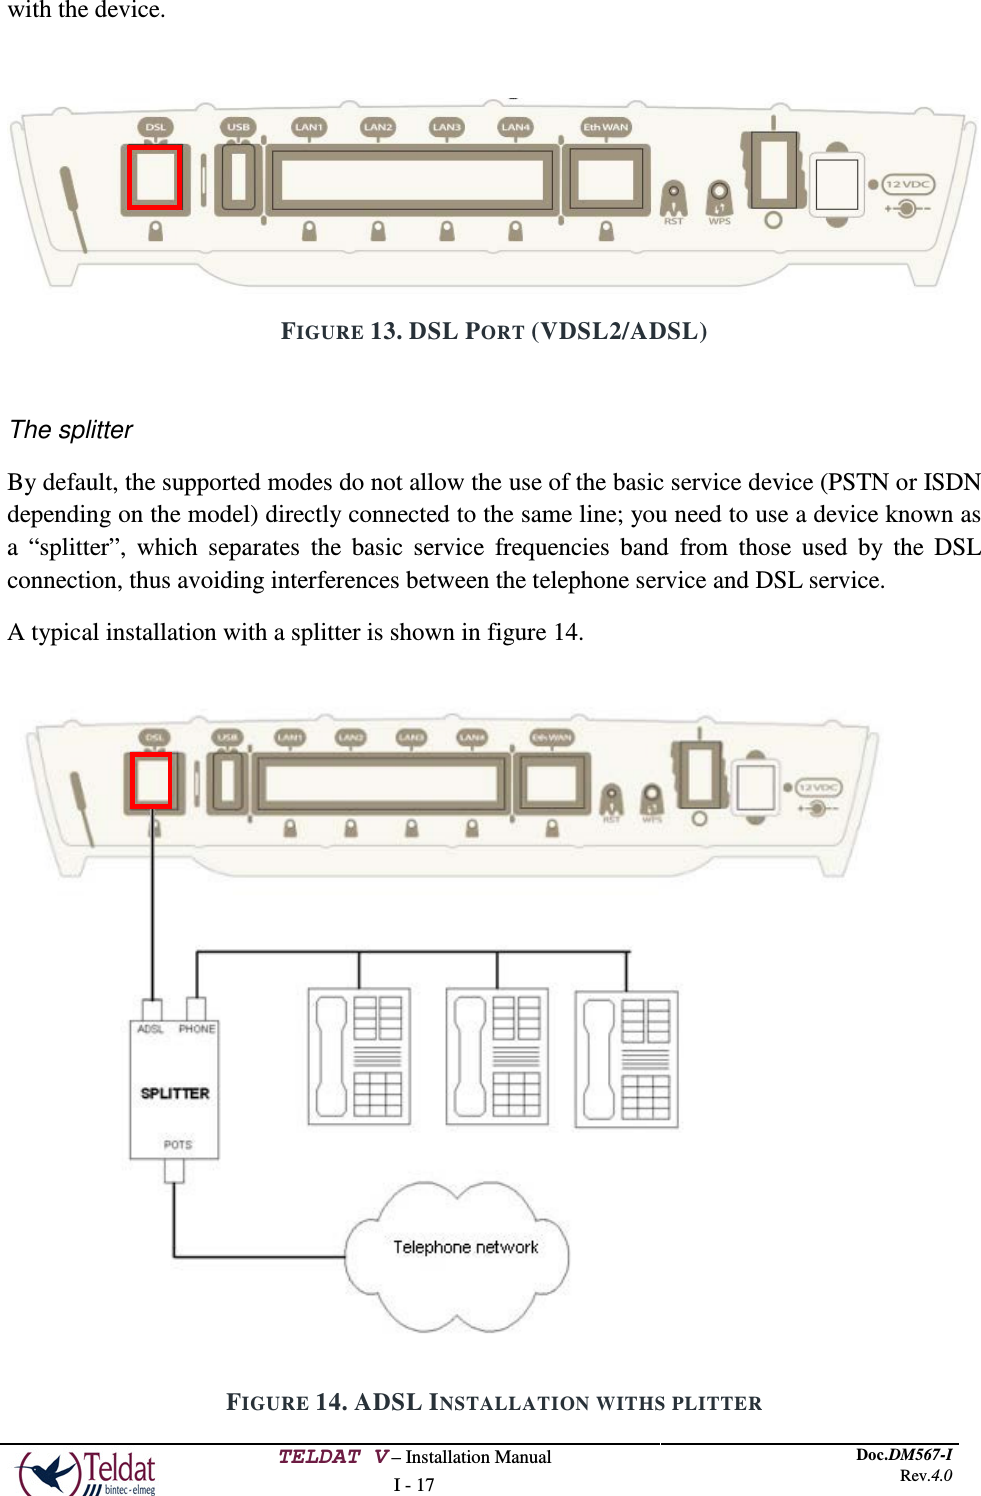  TELDAT V – Installation Manual I - 17 Doc.DM567-I Rev.4.0  with the device.   FIGURE 13. DSL PORT (VDSL2/ADSL)  The splitter By default, the supported modes do not allow the use of the basic service device (PSTN or ISDN depending on the model) directly connected to the same line; you need to use a device known as a  “splitter”, which separates the basic service frequencies band from those used by the DSL connection, thus avoiding interferences between the telephone service and DSL service. A typical installation with a splitter is shown in figure 14.  FIGURE 14. ADSL INSTALLATION WITHS PLITTER   